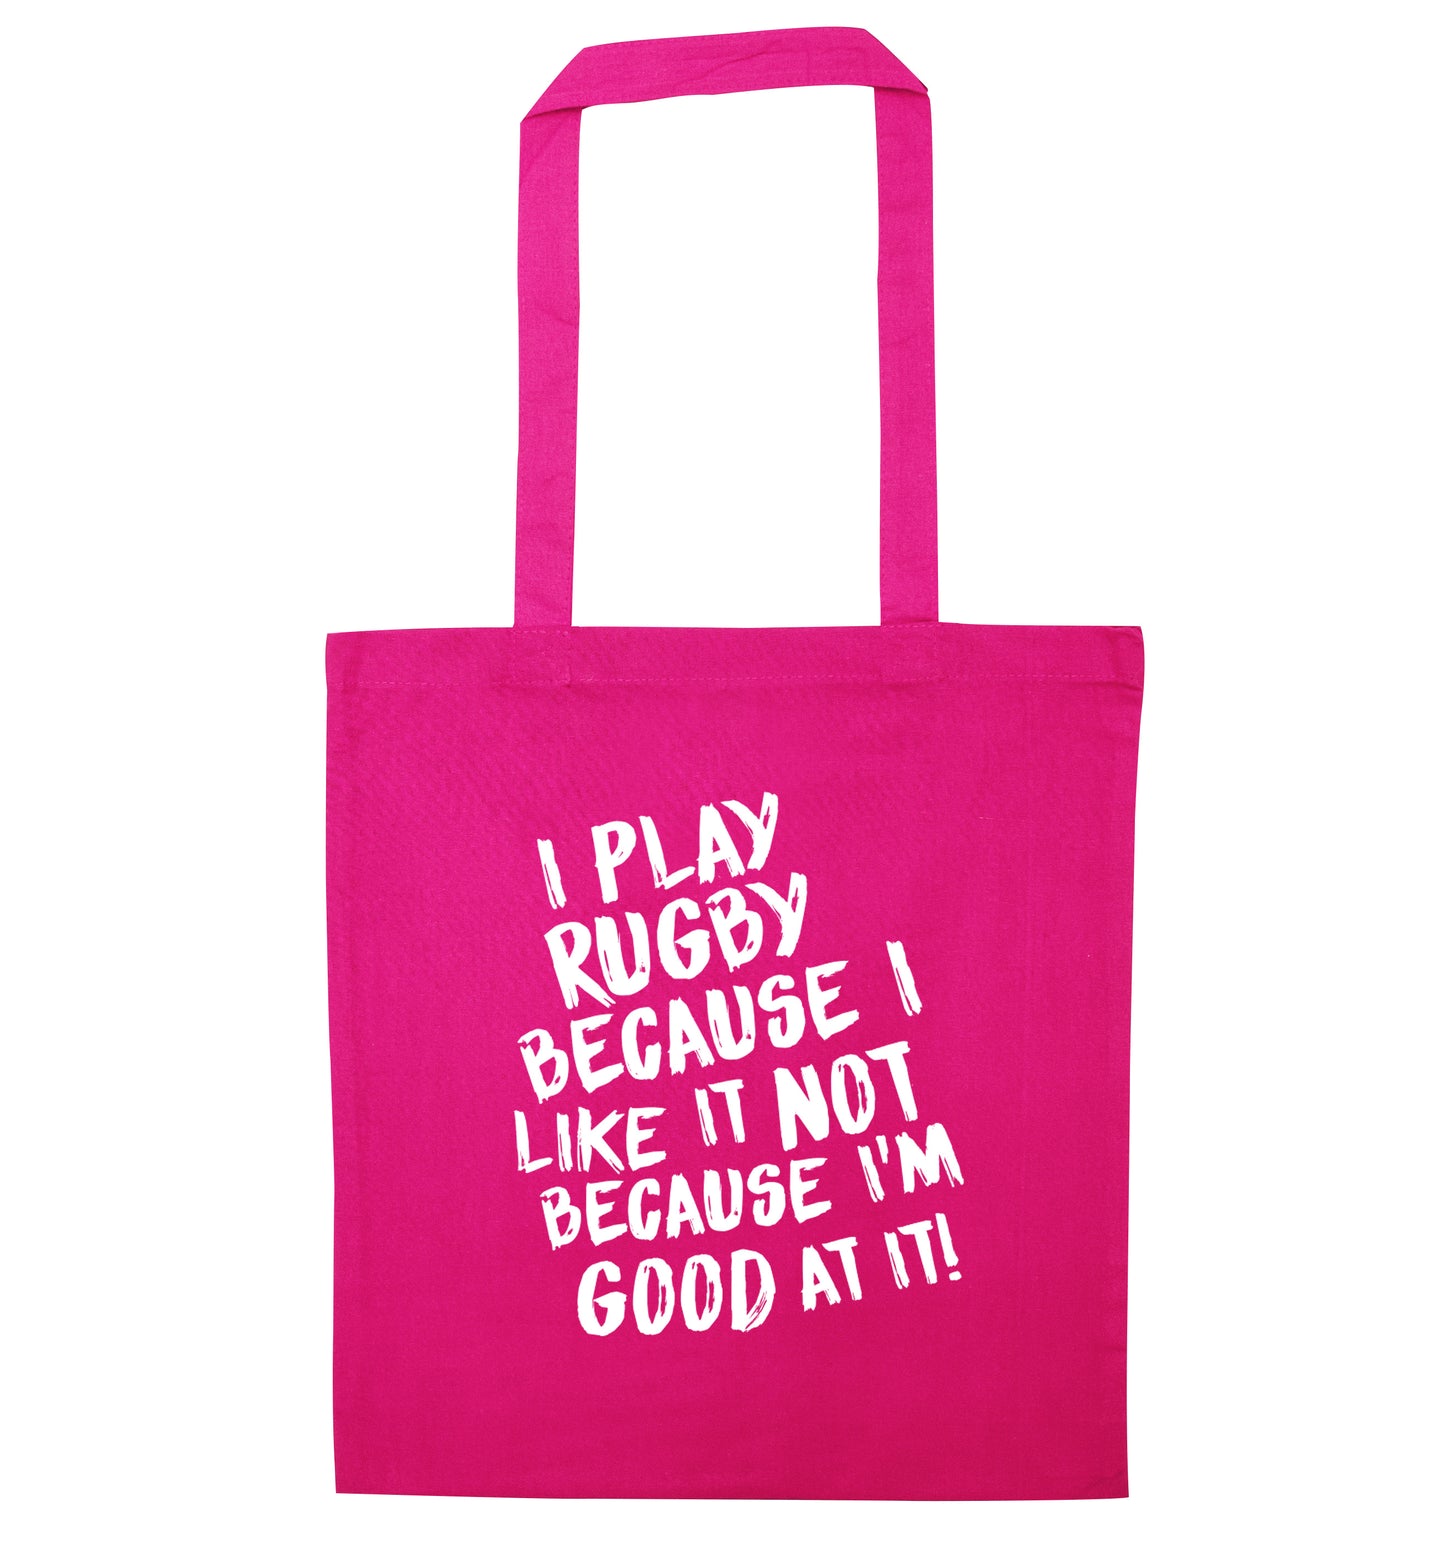 I play rugby because I like it not because I'm good at it pink tote bag